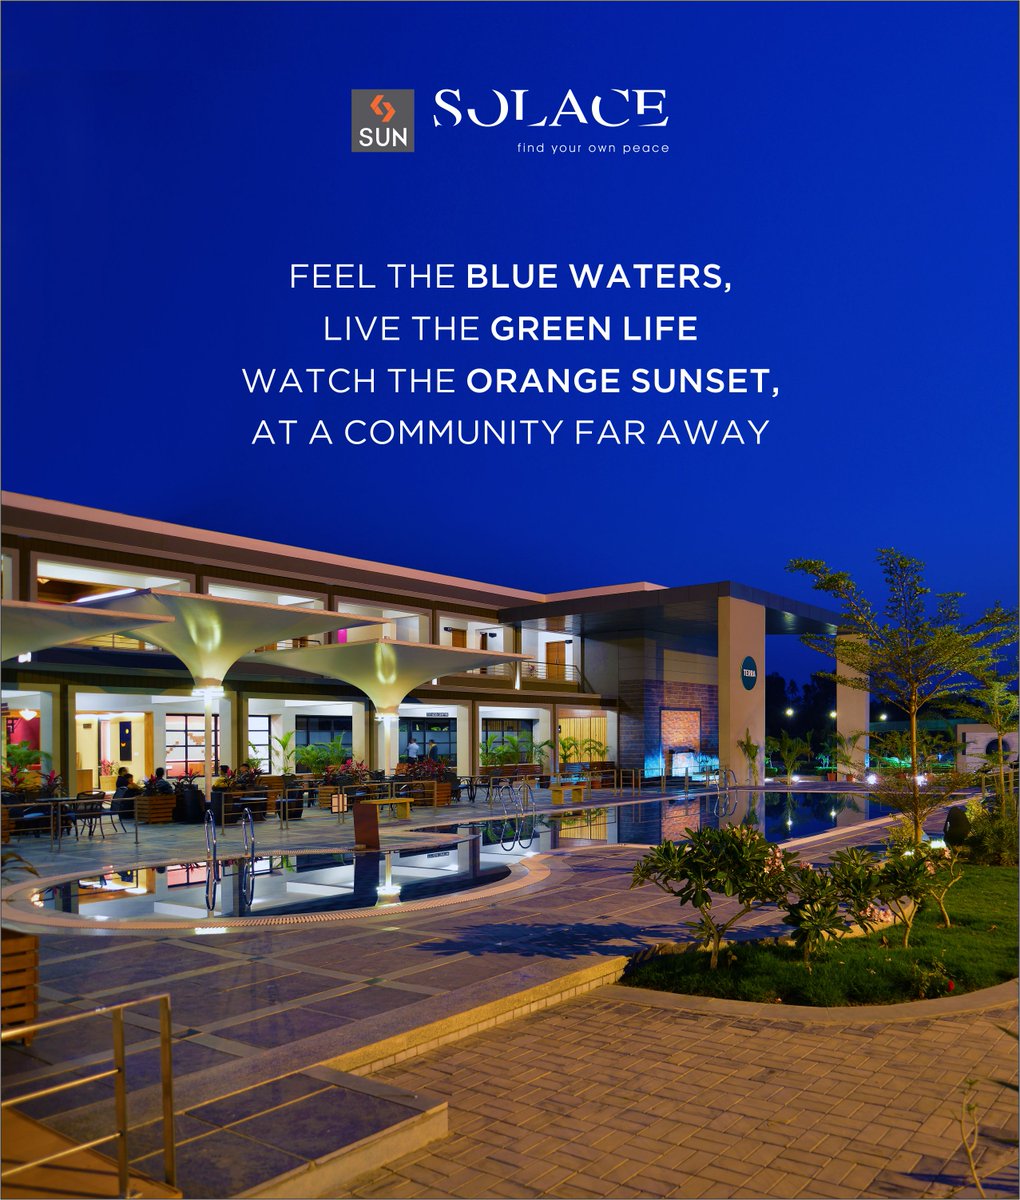 Experience the real beauty of divine colours only at Sun Solace.
Explore more at: https://t.co/t4PmWe8mQe https://t.co/q6b8VEVvk6